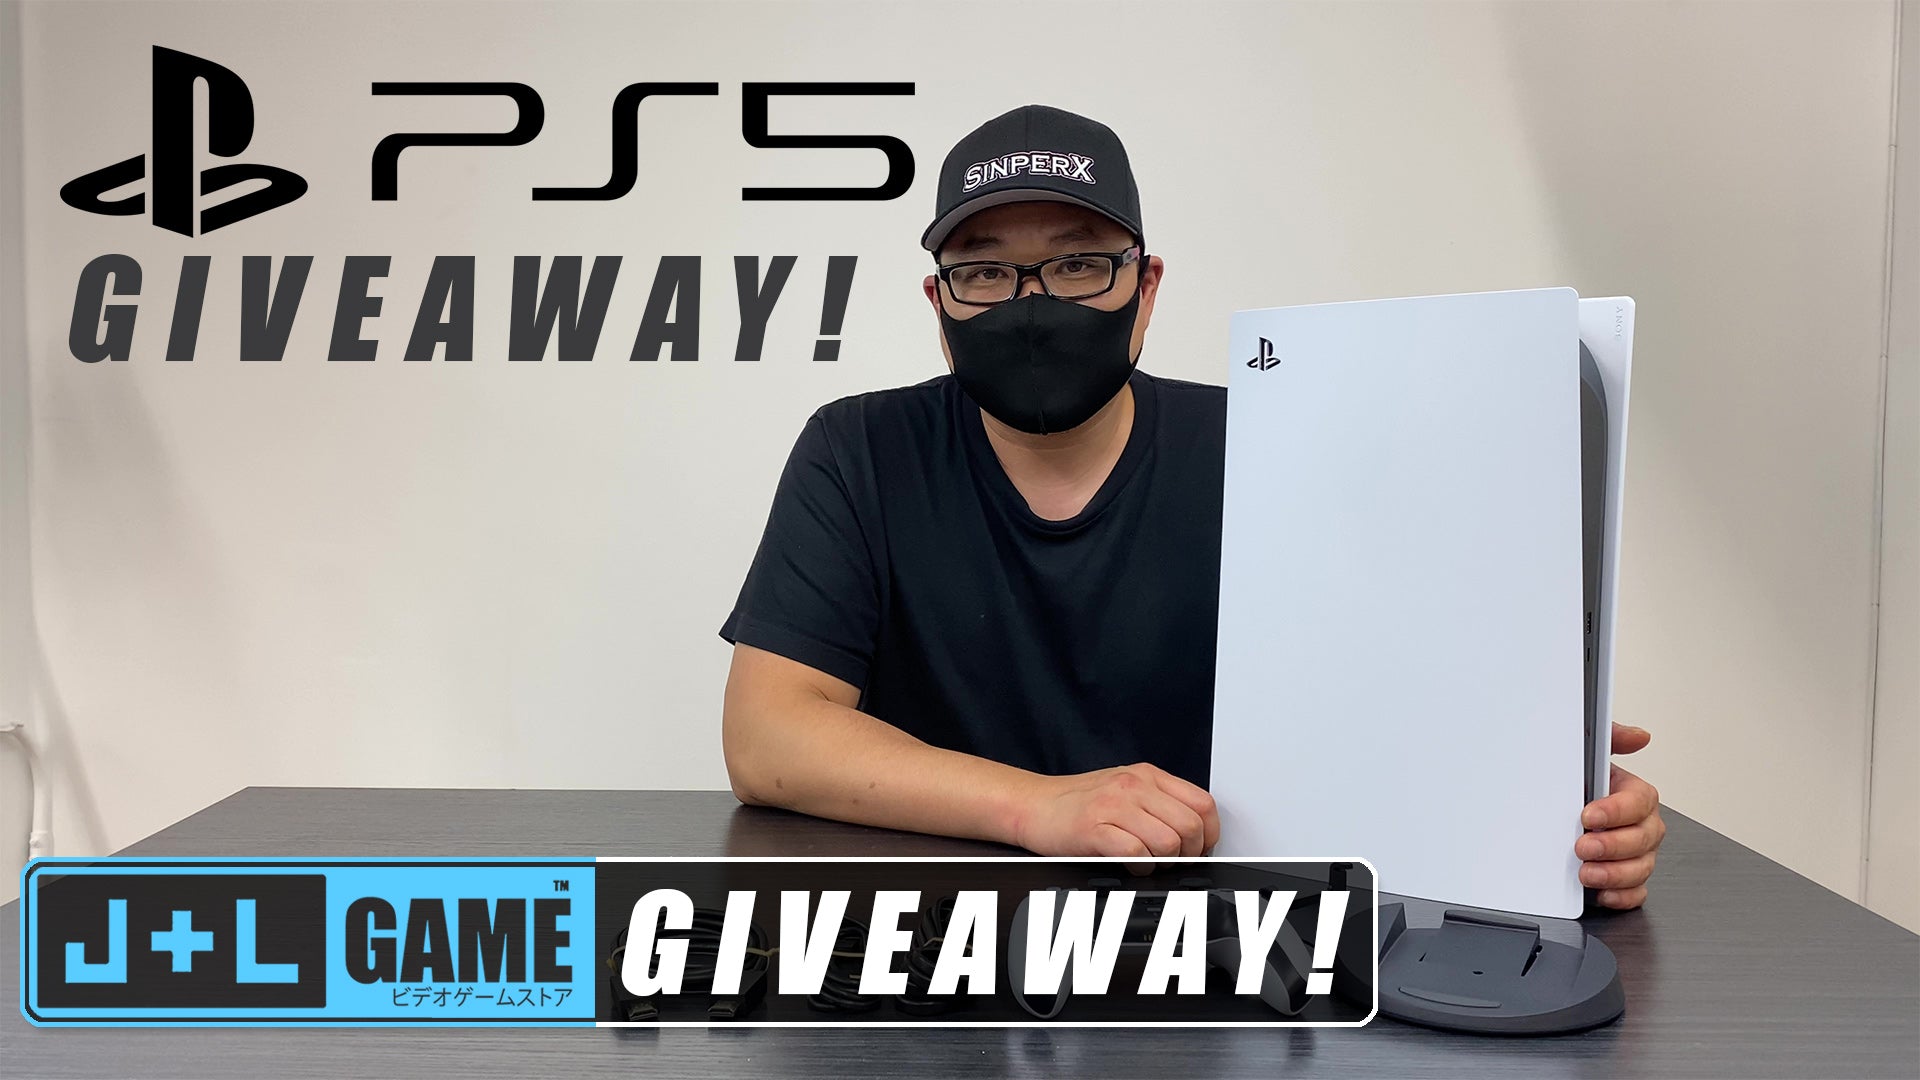 PS5 Physical Disc Console Giveaway!